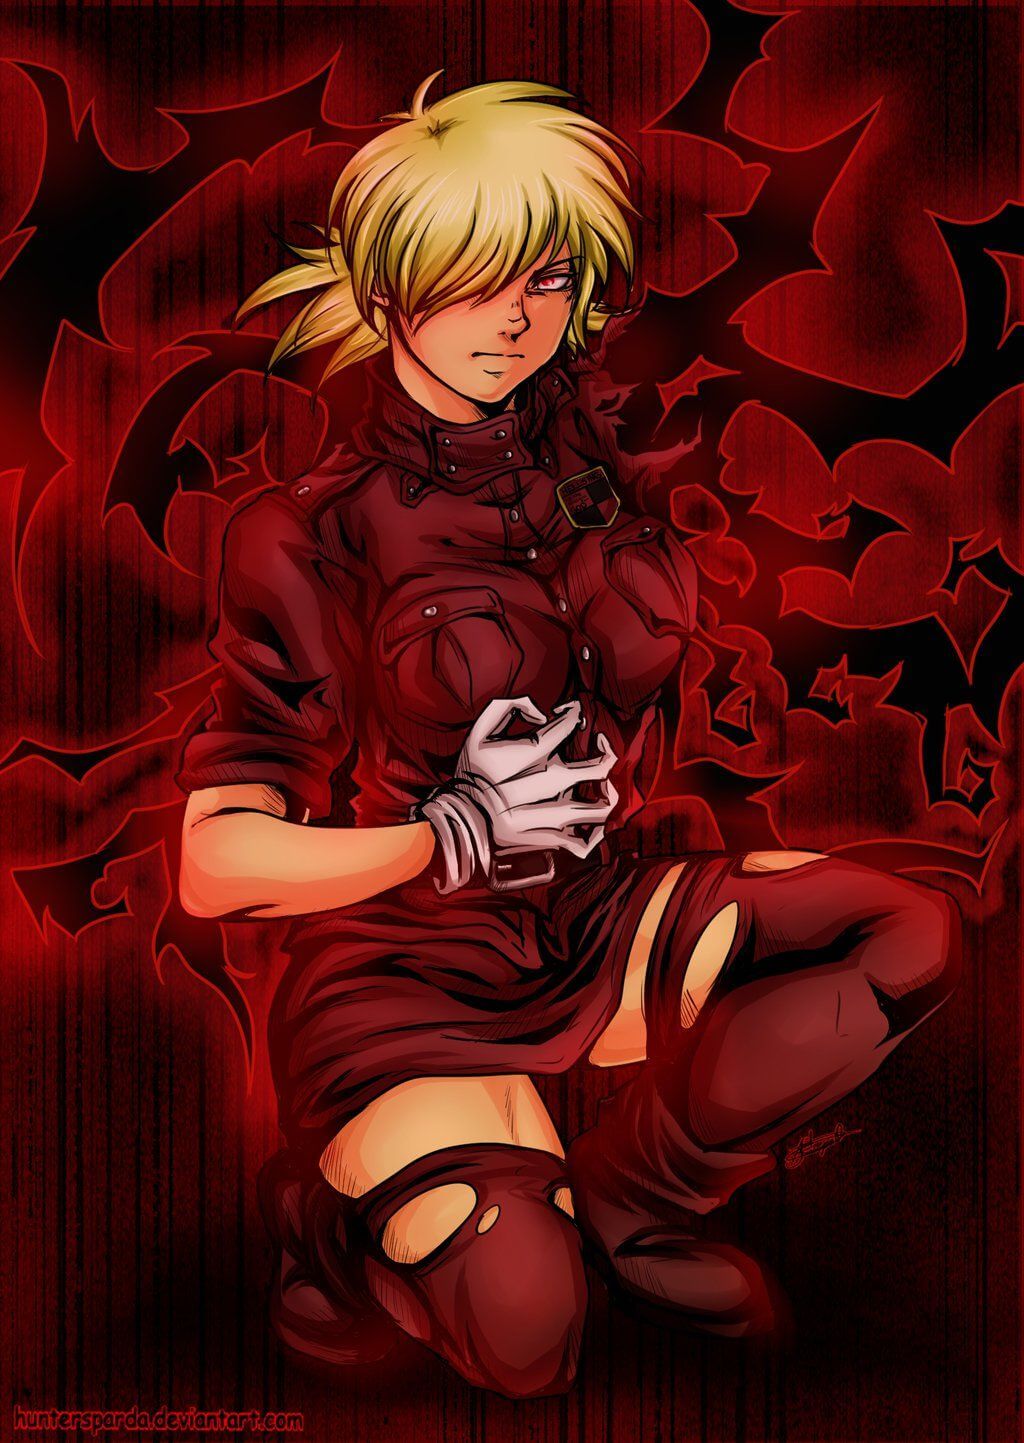 49 Seras Victoria Nude Pictures Are Sure To Keep You At The Edge Of Your Seat 3